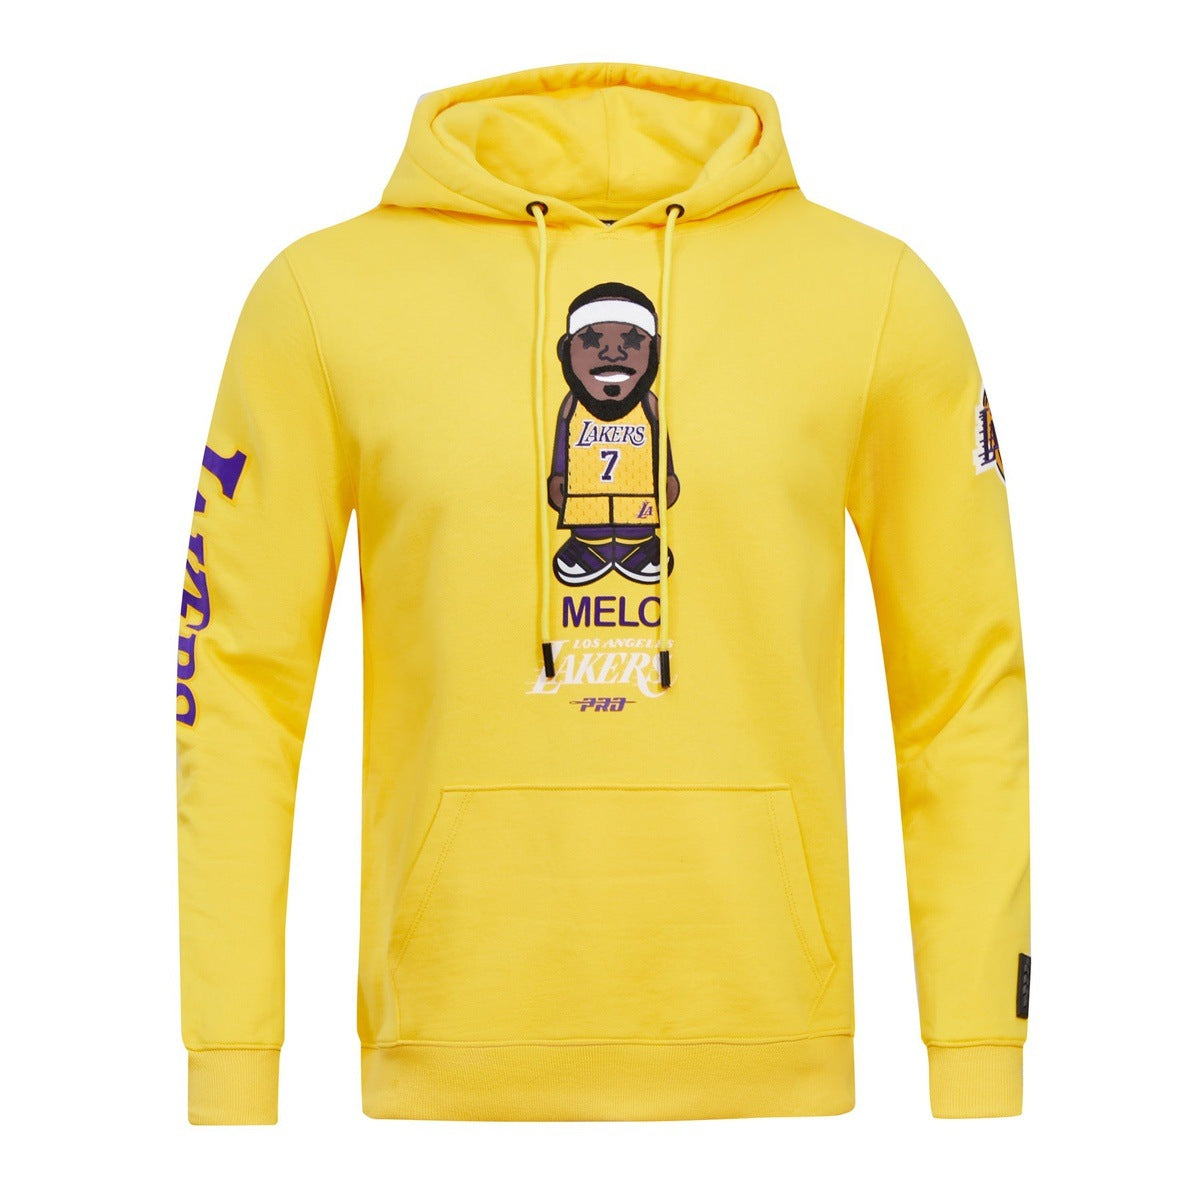 LOS ANGELES LAKERS PRO CARTOON PLAYER HOODY MELO (YELLOW)